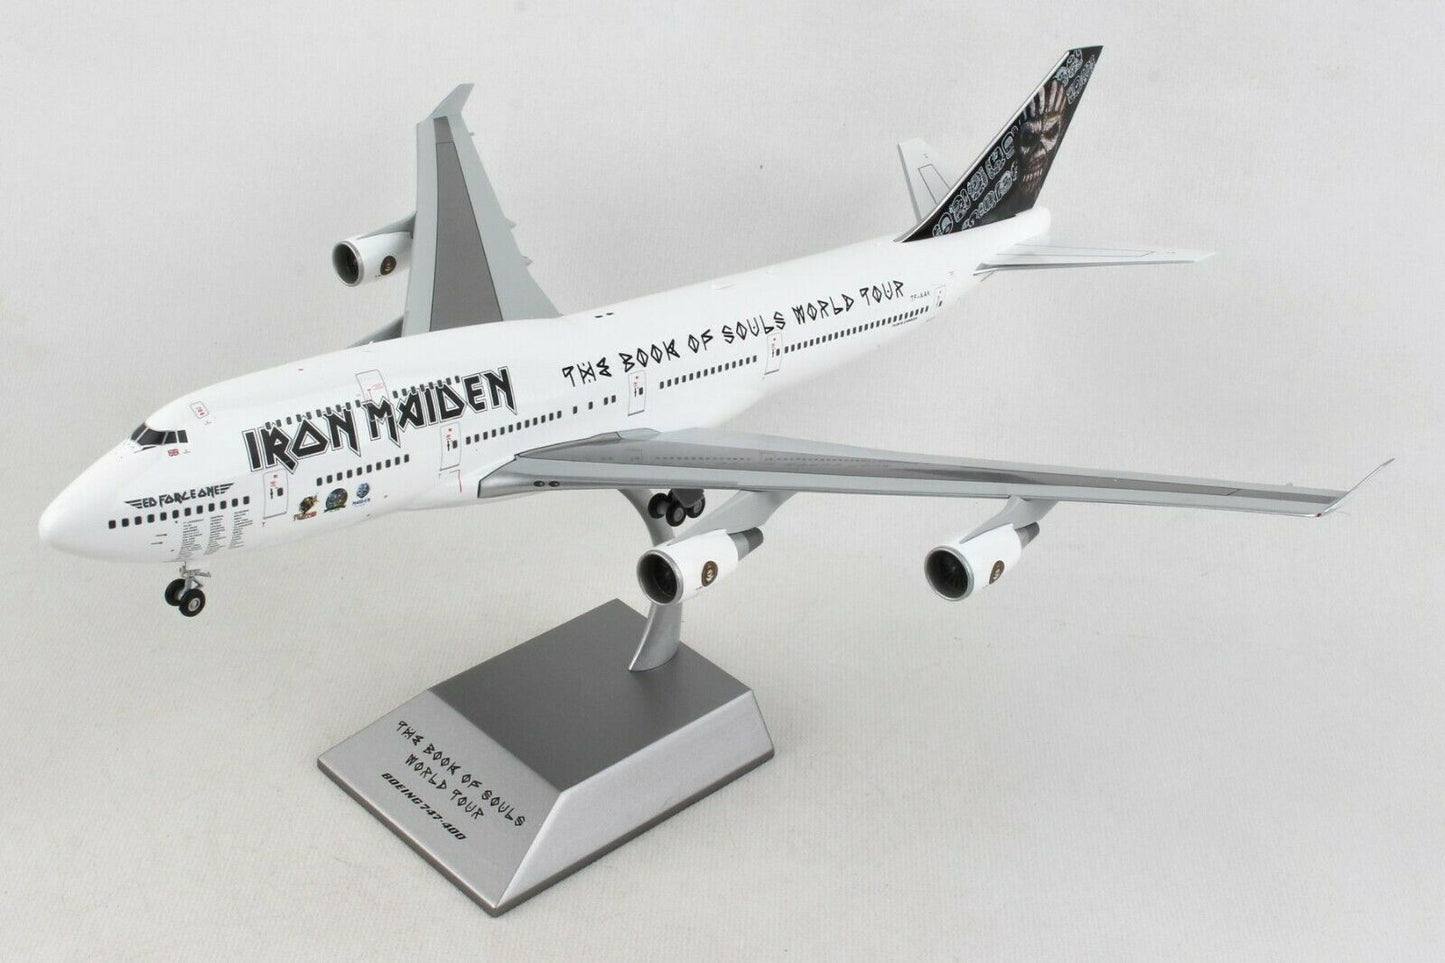 Herpa 571609 1:200 Iron Maiden Boeing 747-400 Ed Force One